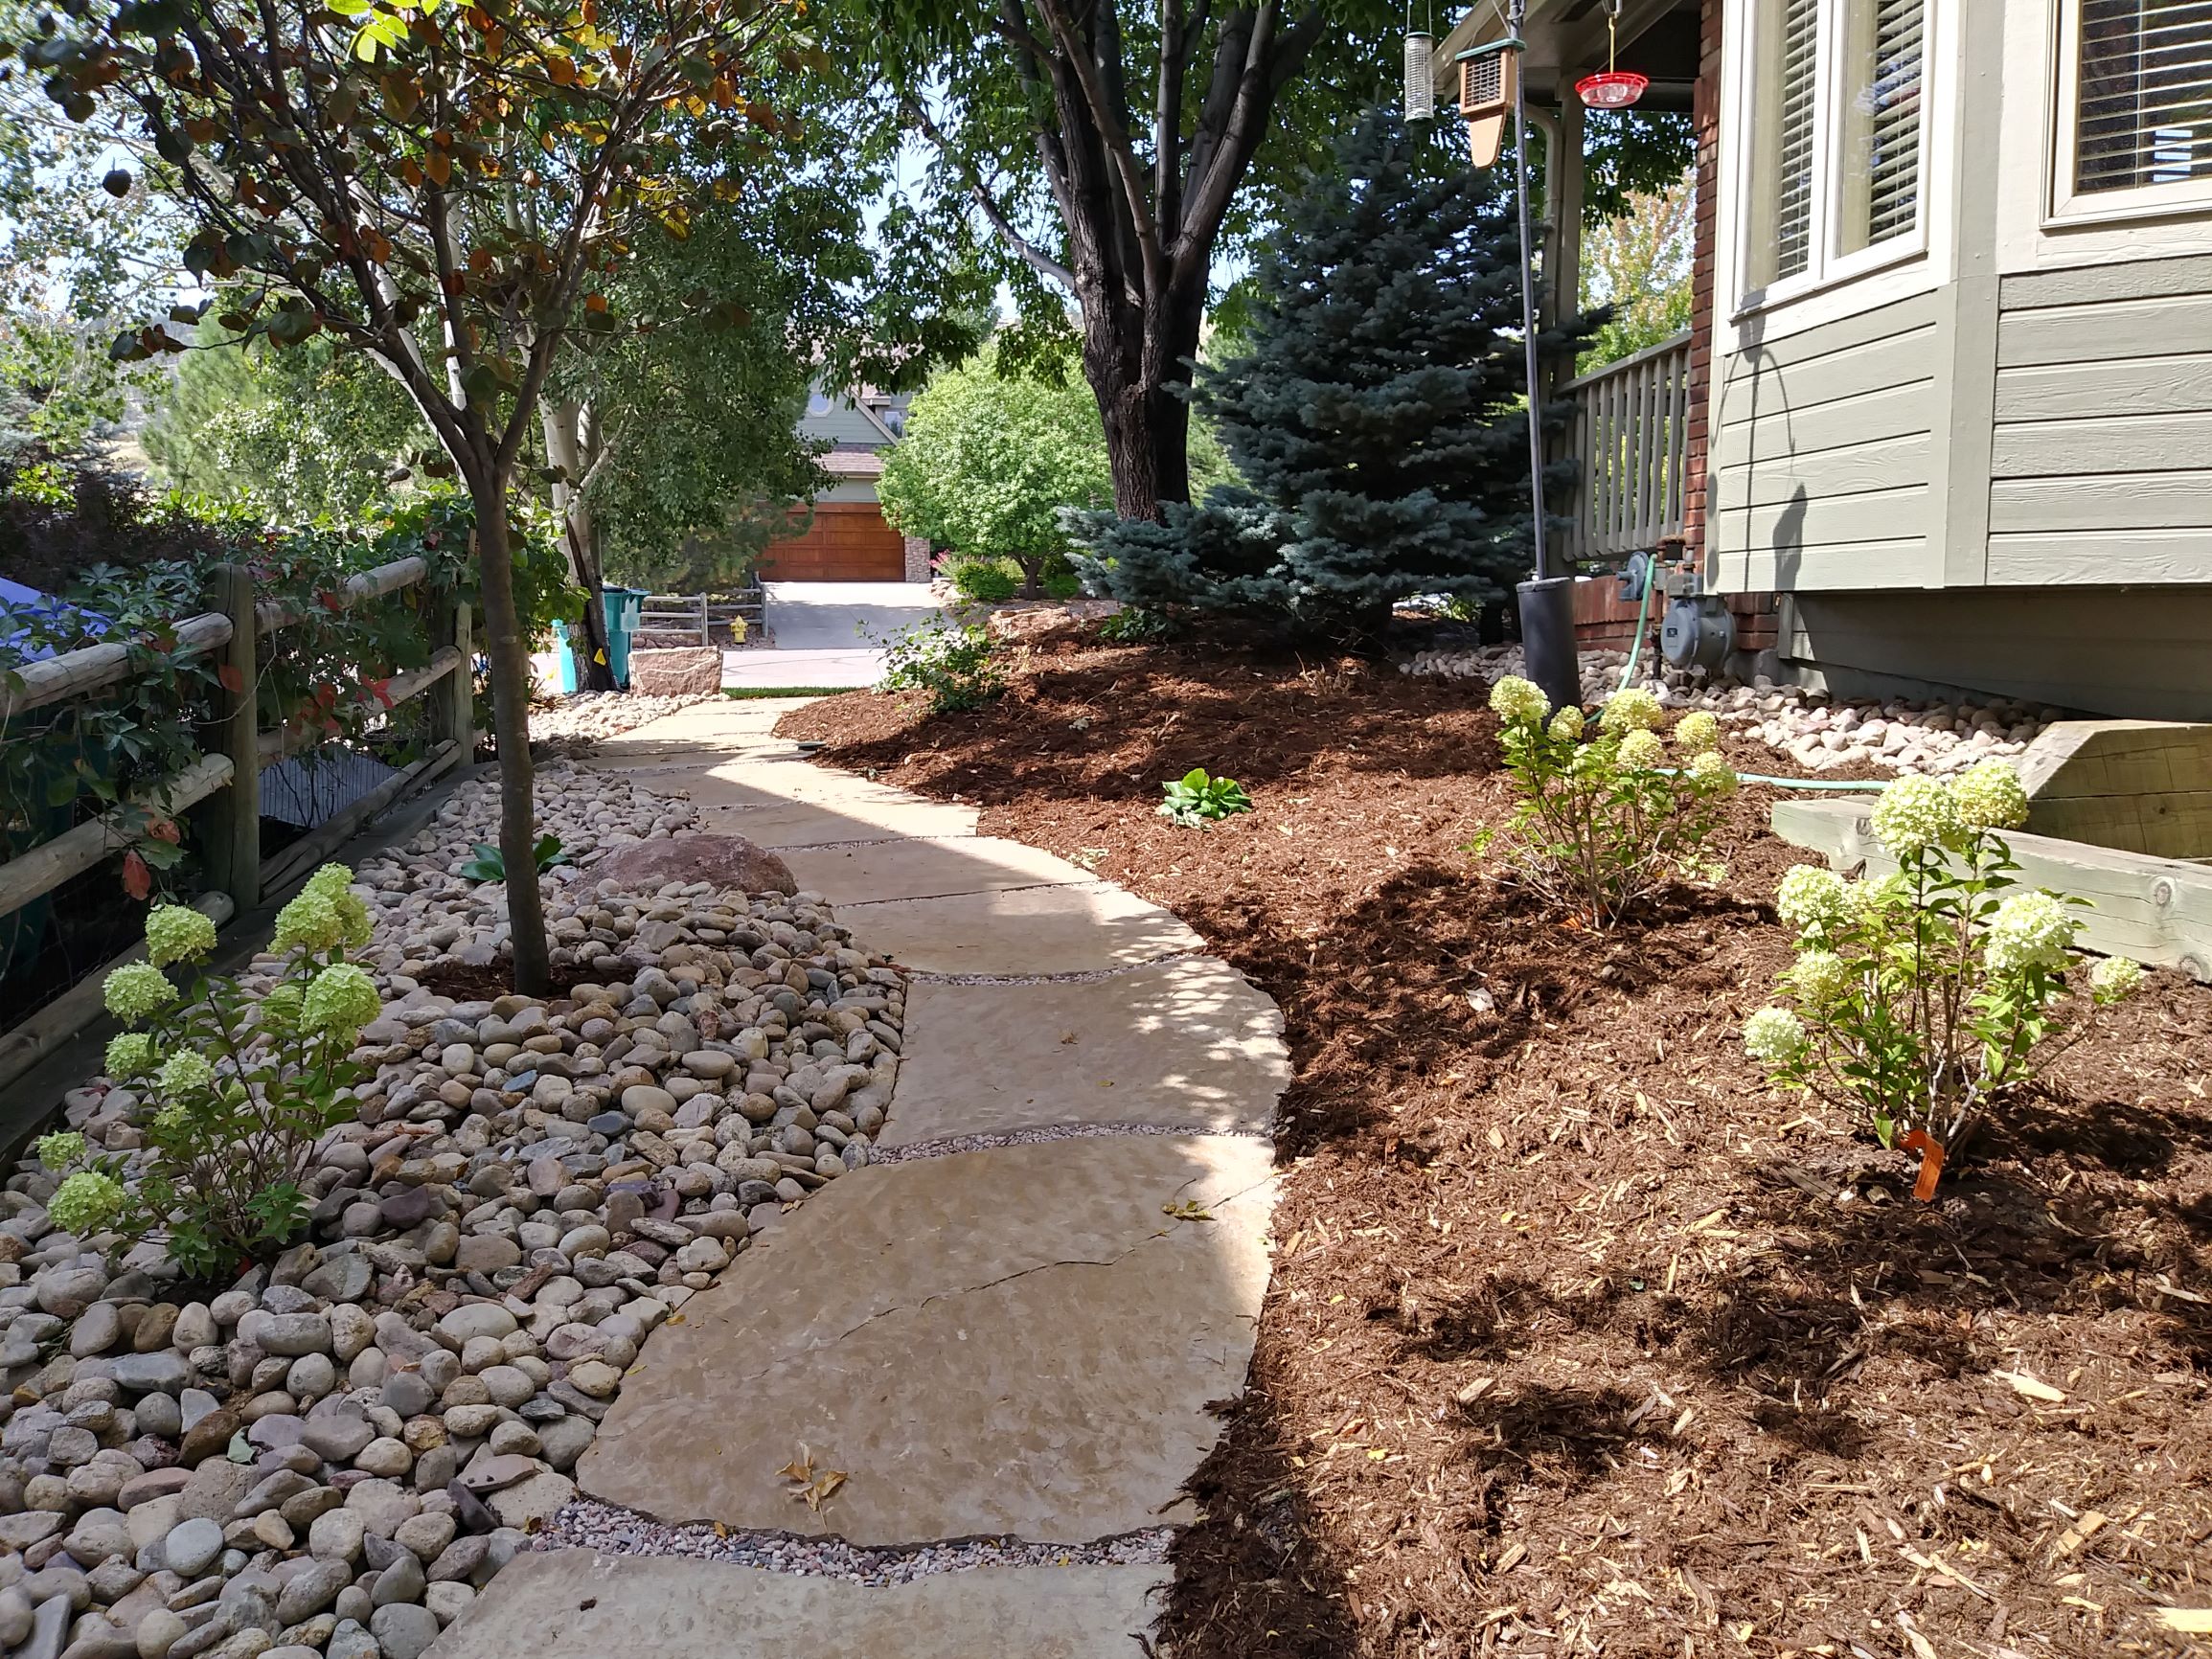 Stepping stone path with mulch and rock bordering its length.